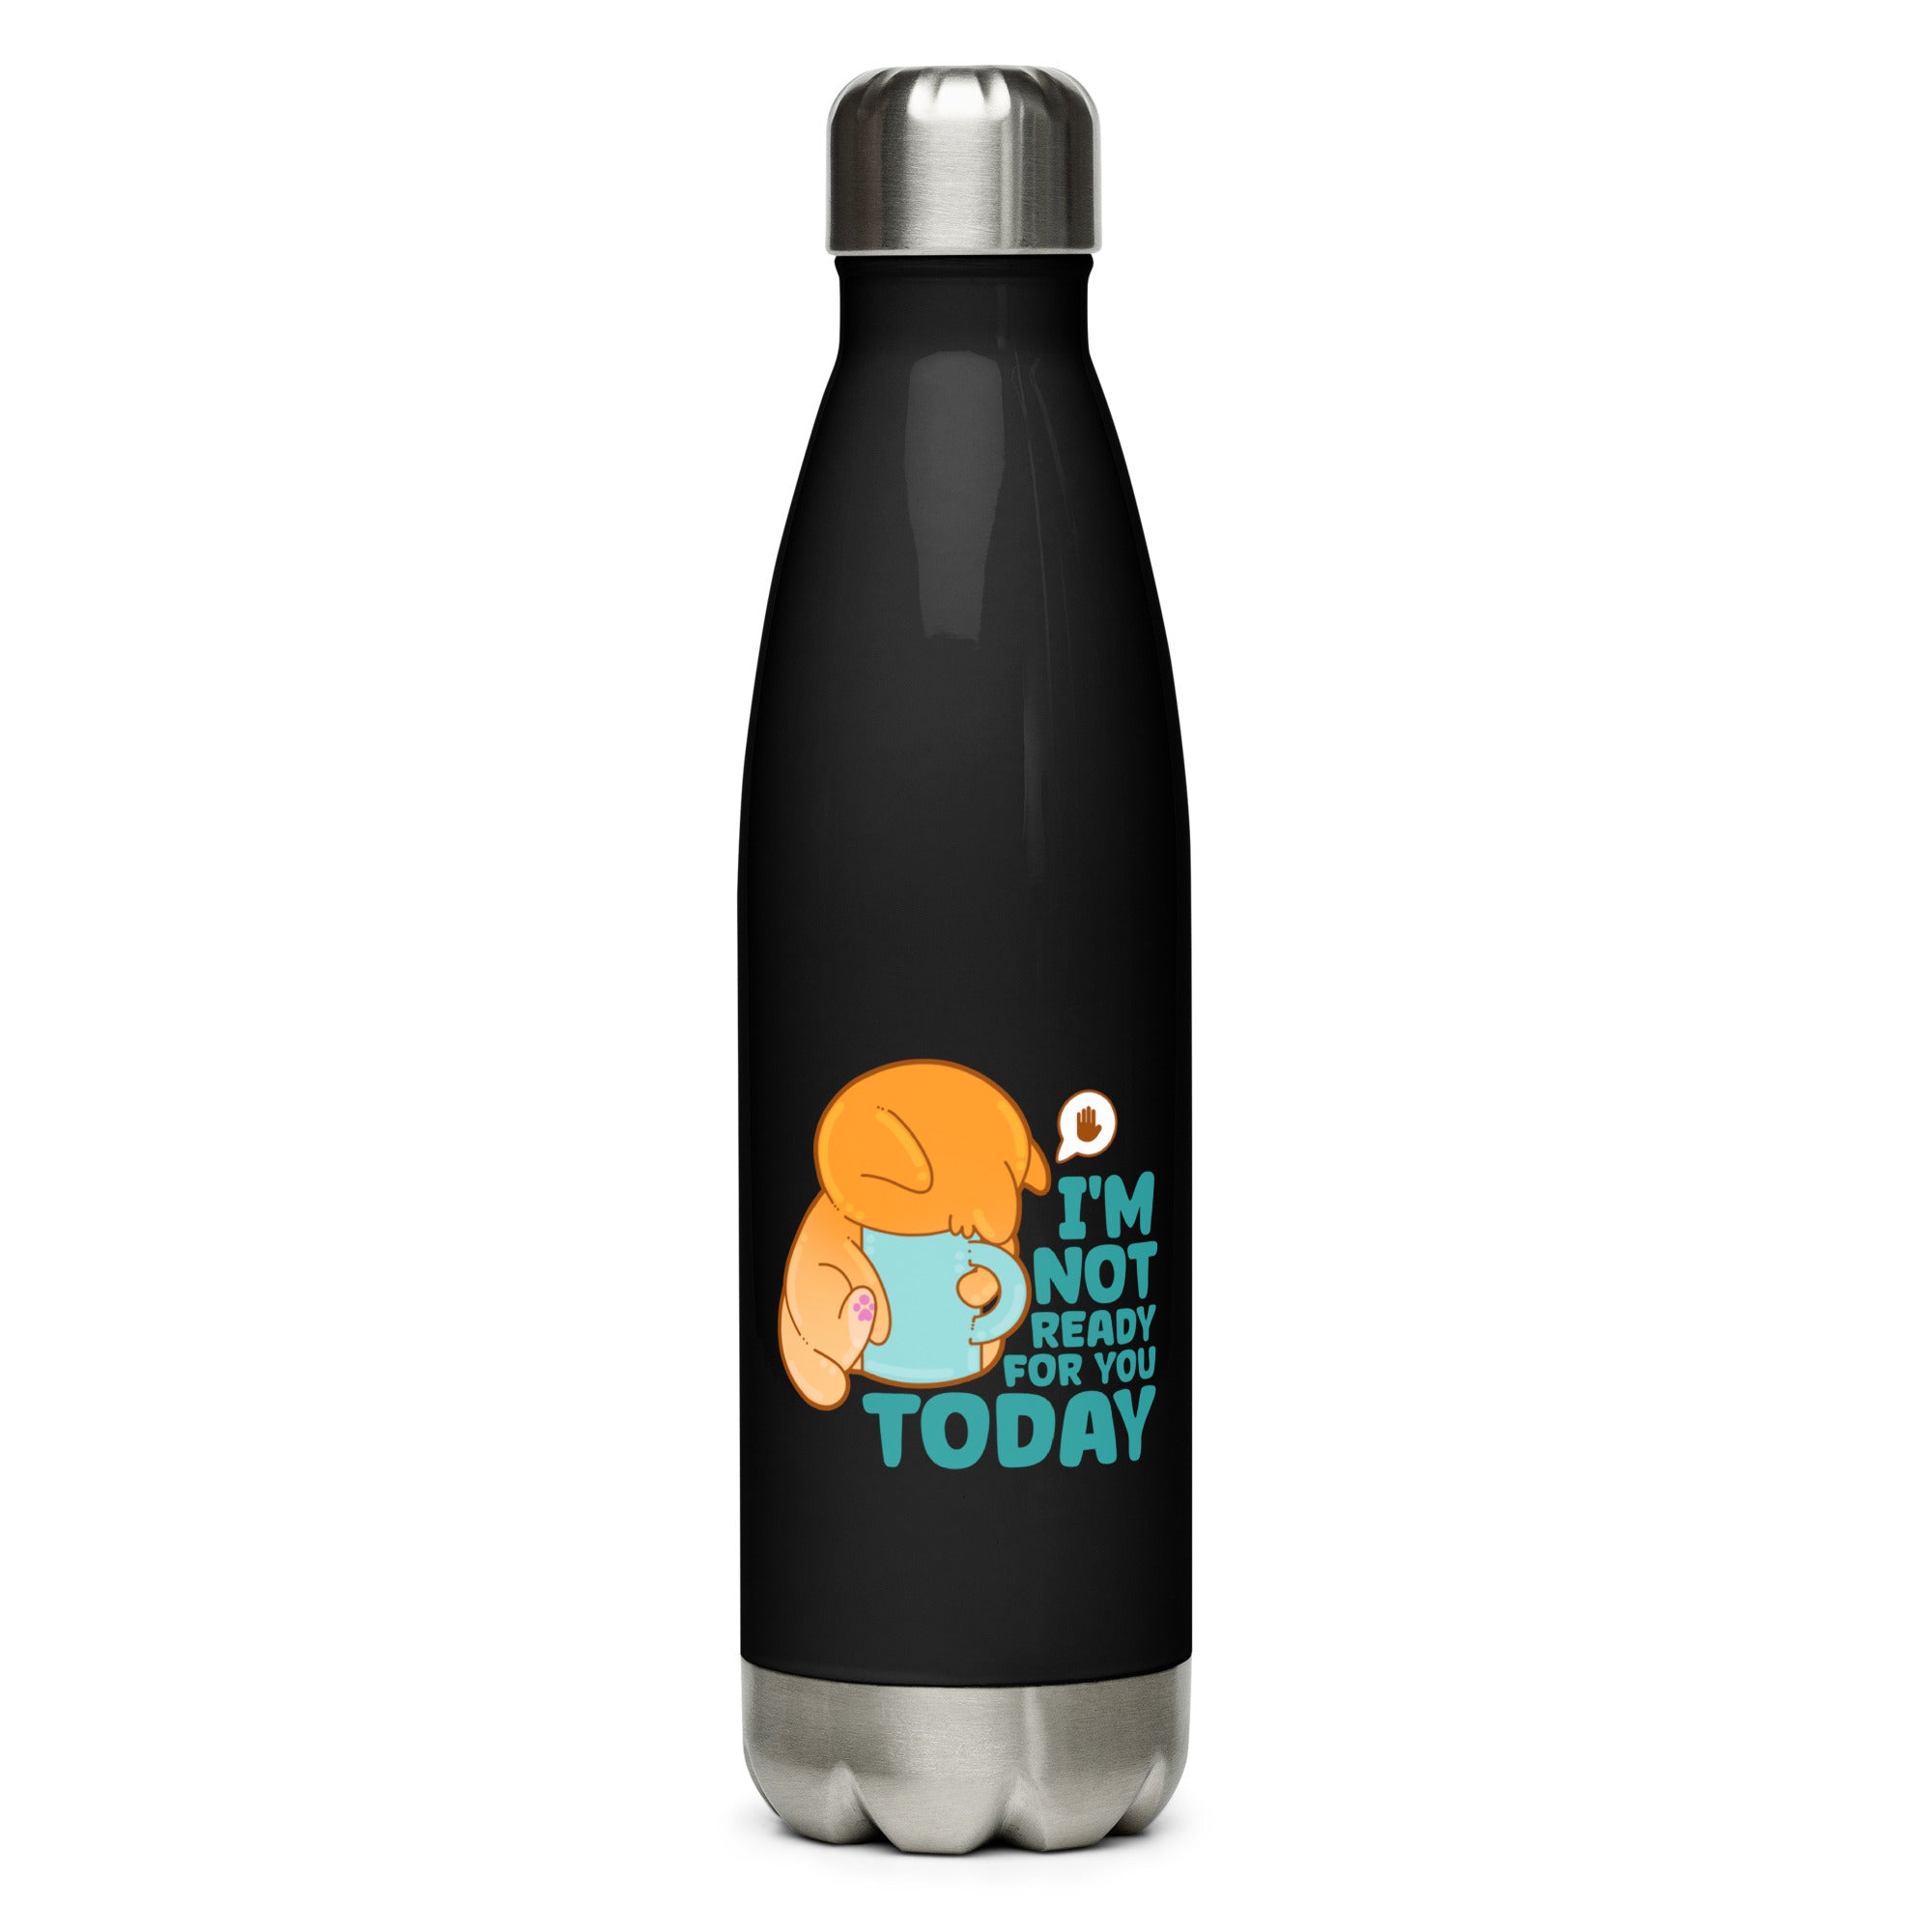 IM. IT READY FOR YOU TODAY - Stainless Steel Water Bottle - ChubbleGumLLC